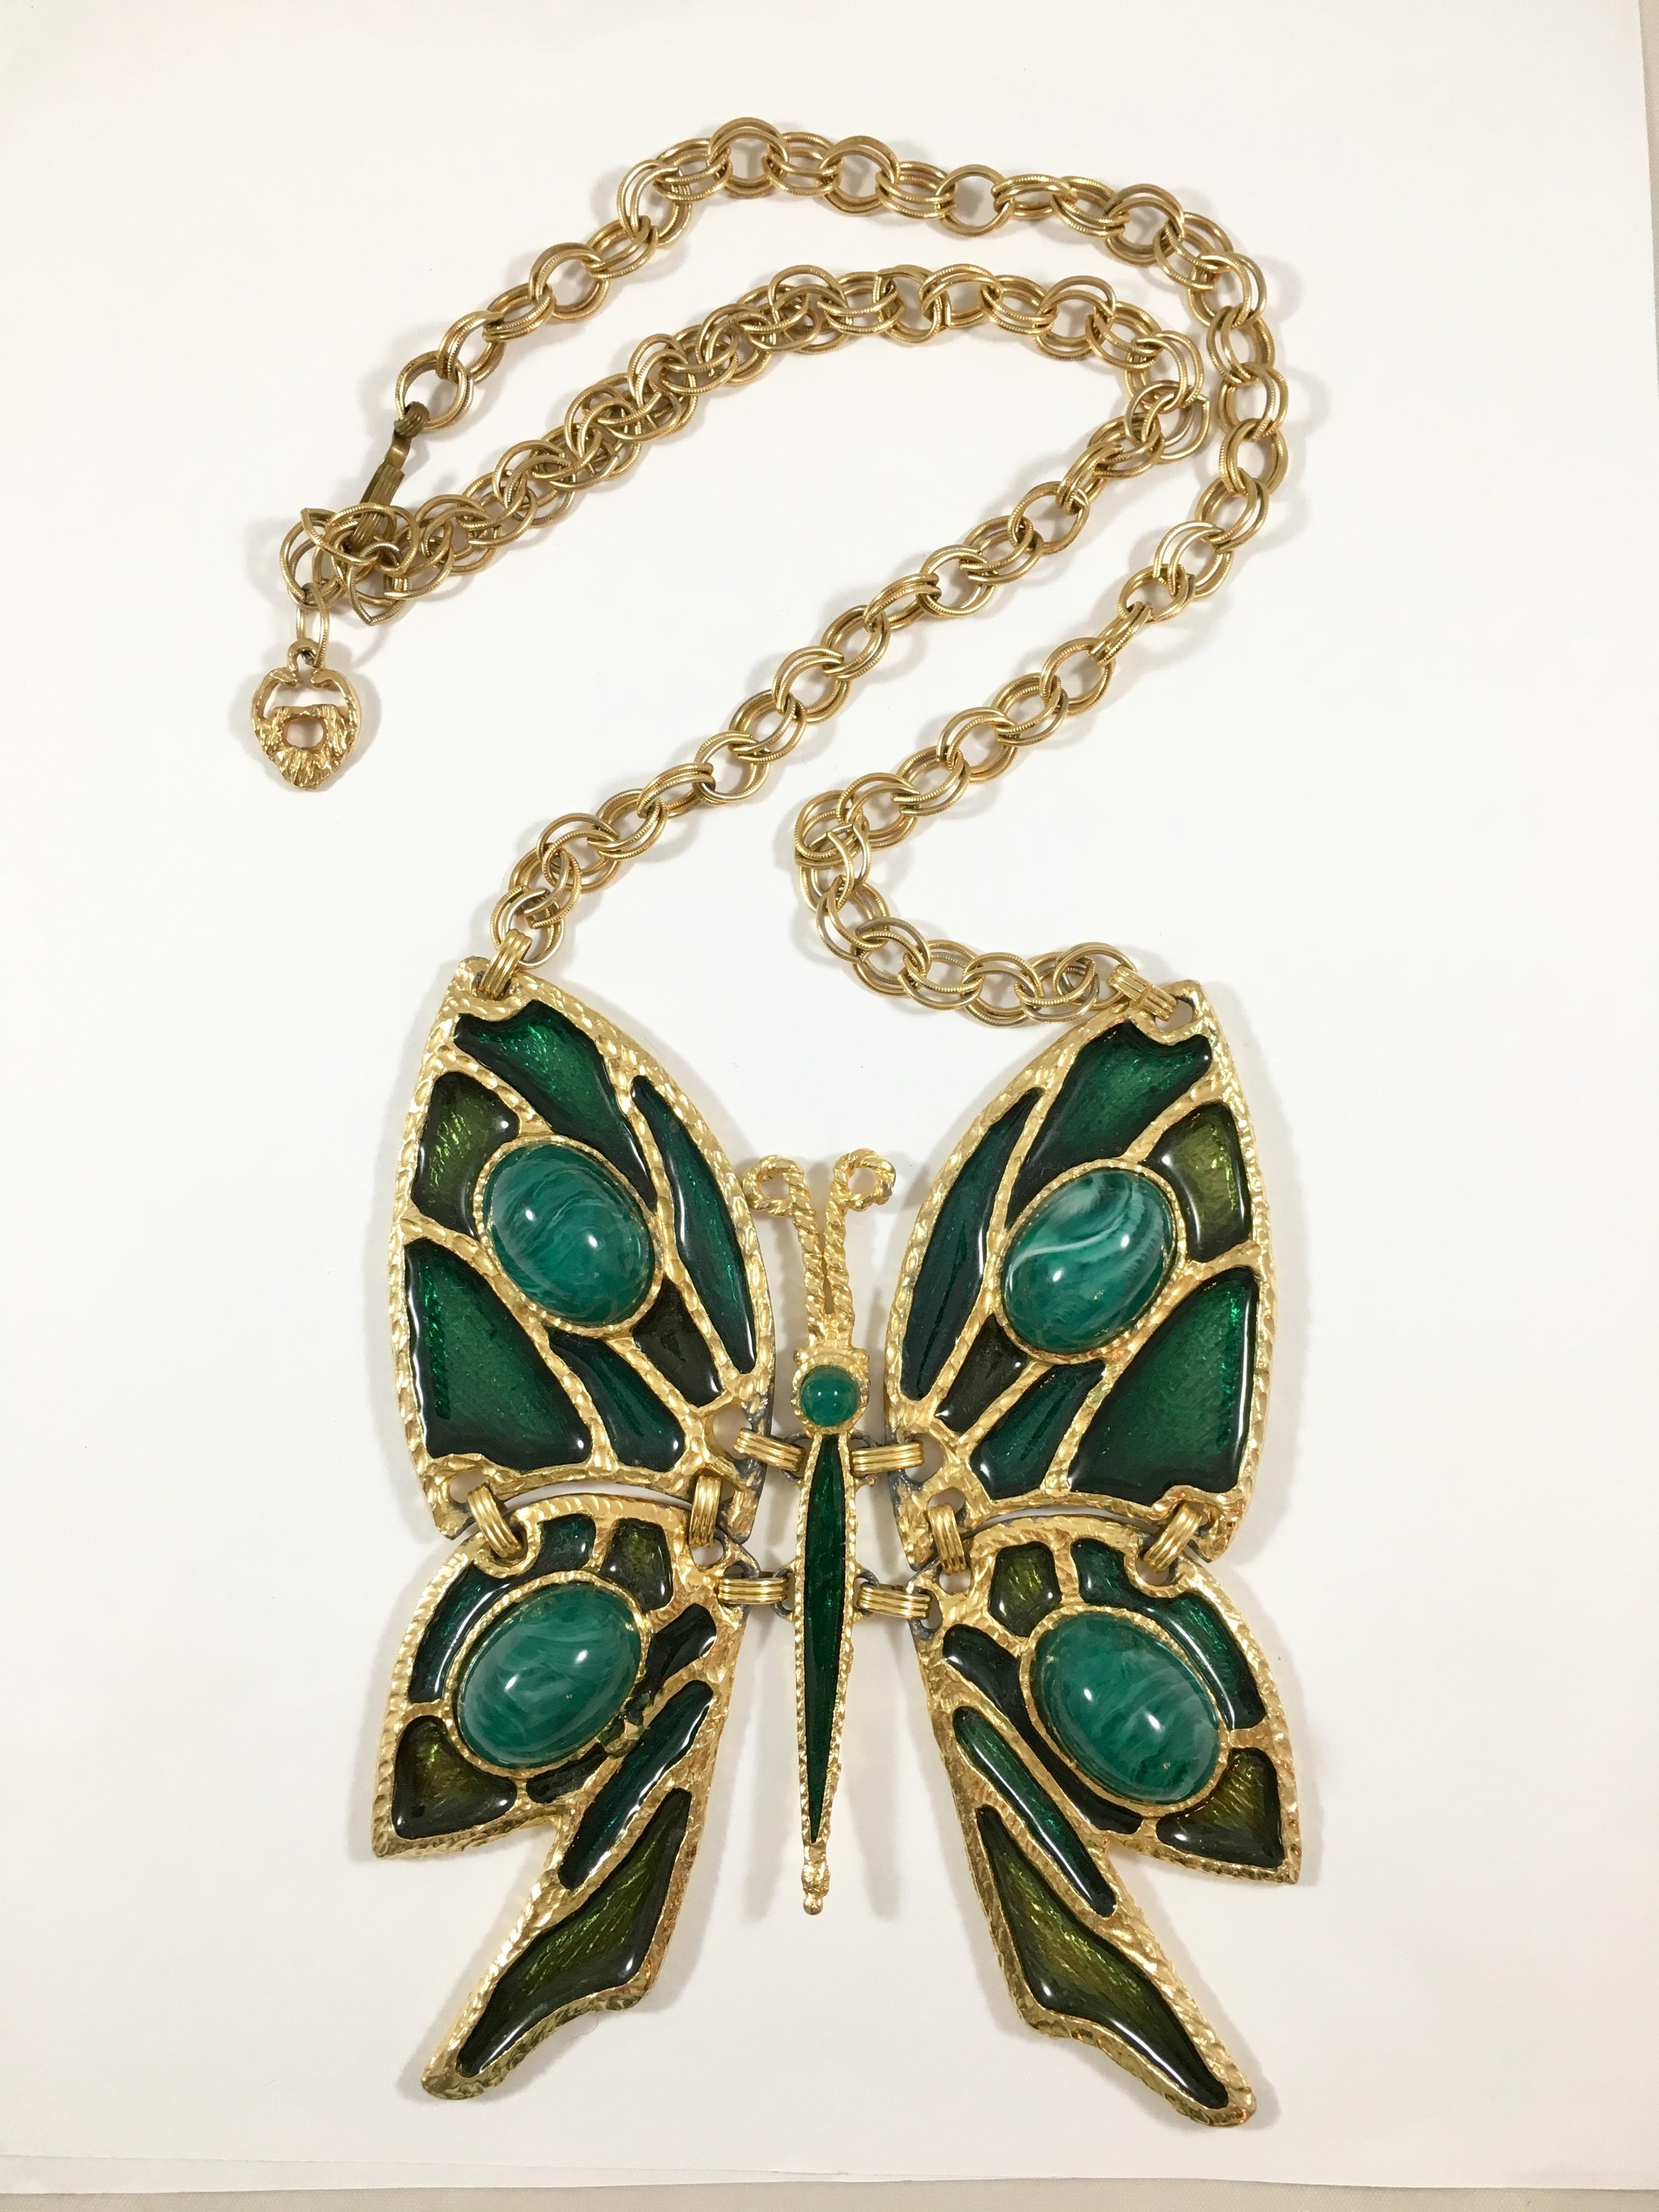 This is a massive articulated butterfly pendant necklace from the 1970s. The butterfly pendant is made out of a green enameled gold-toned metal with four green resin stones used on the wings and one resin stone used for the head. The piece makes an